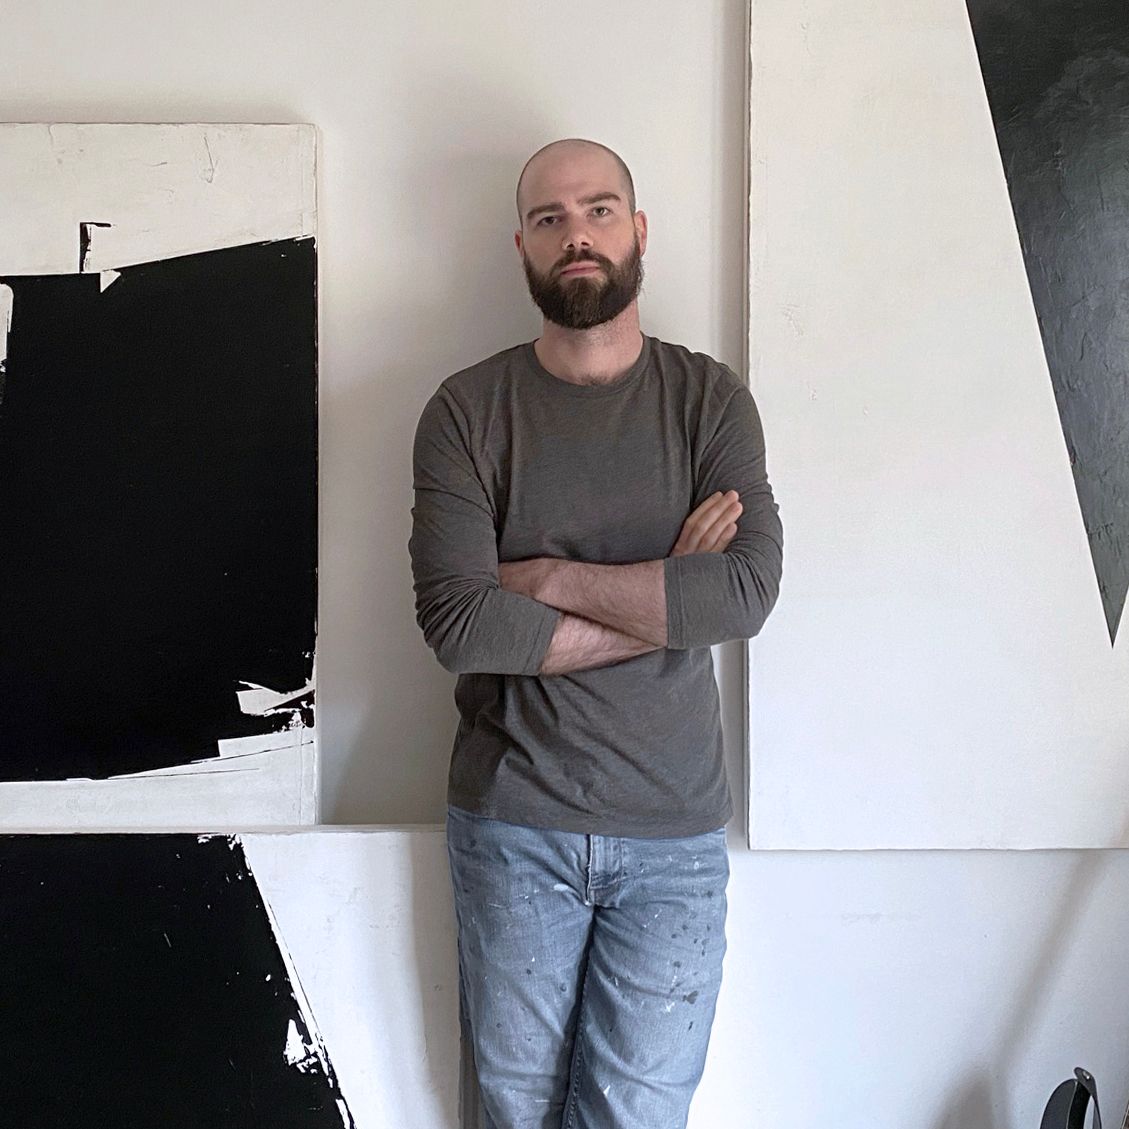 A man with a beard is standing in front of two paintings